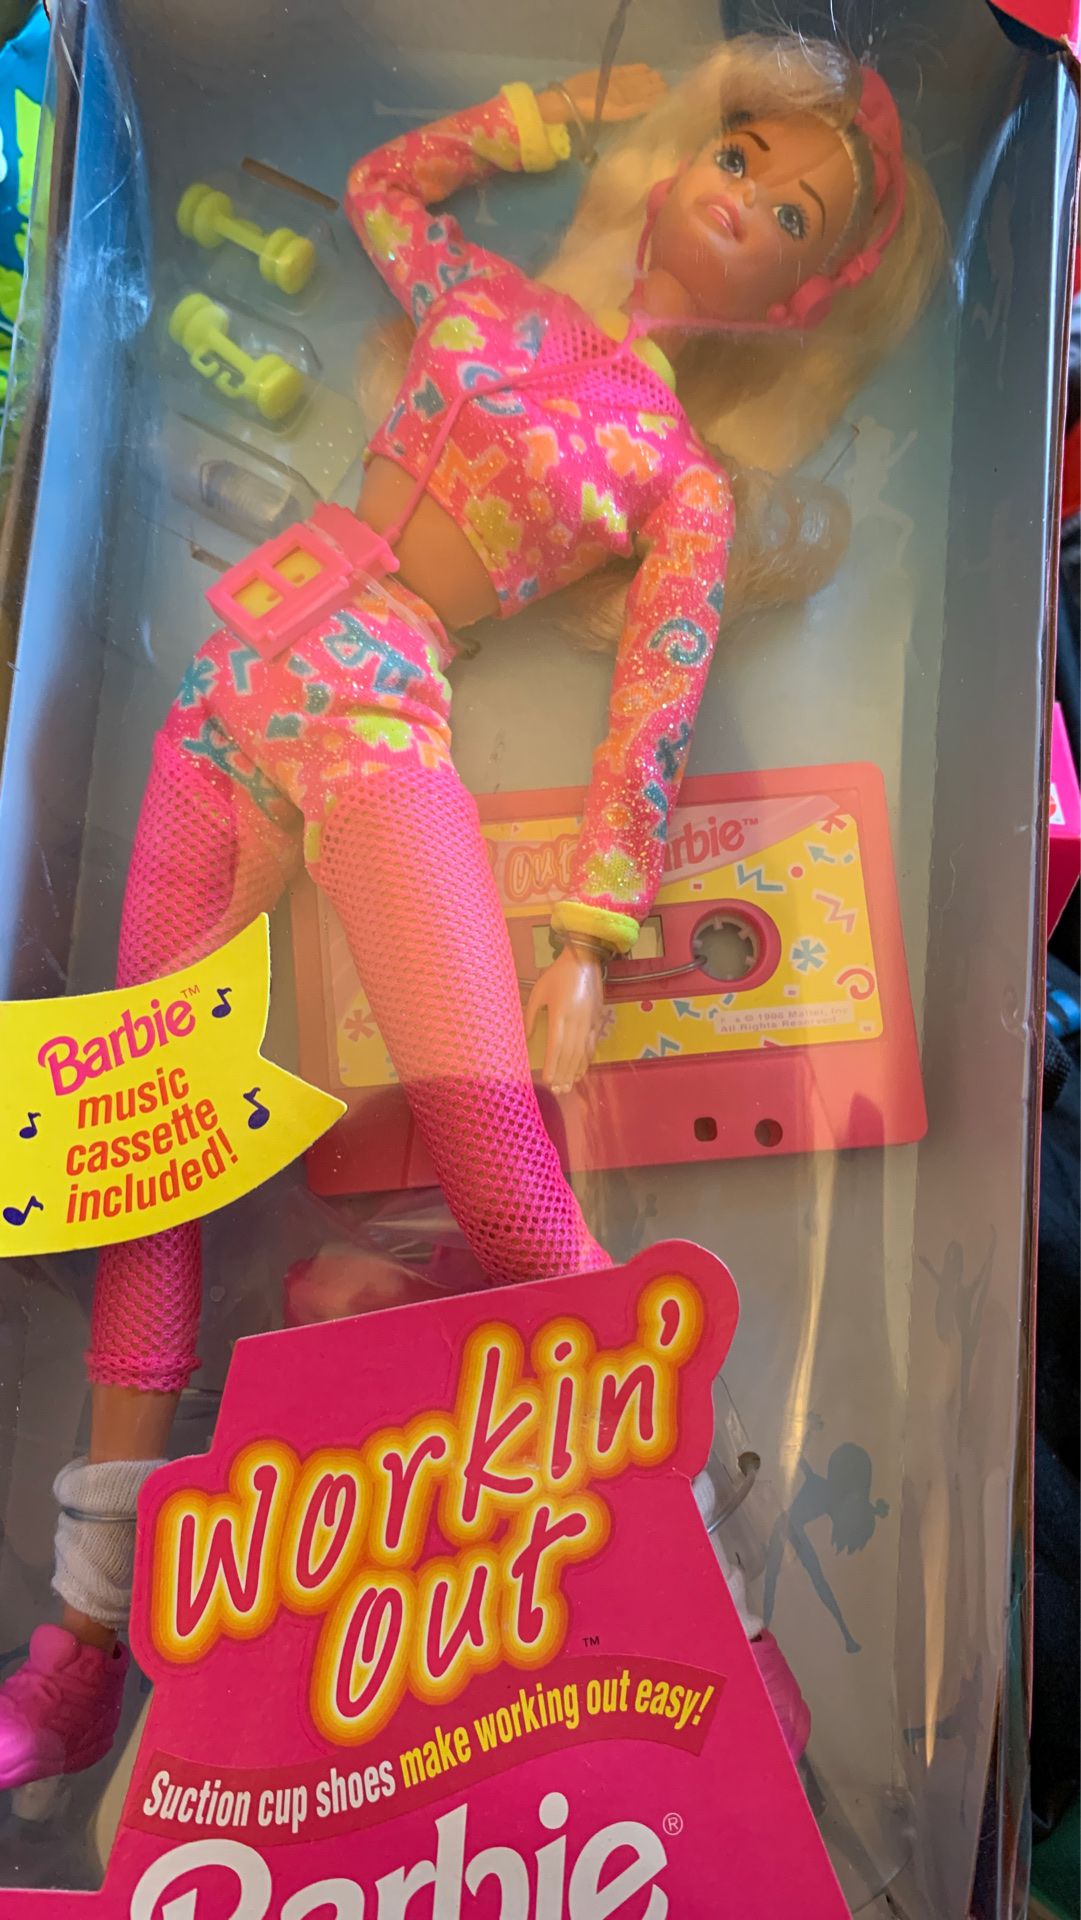 1996 Mattel Barbie Working out